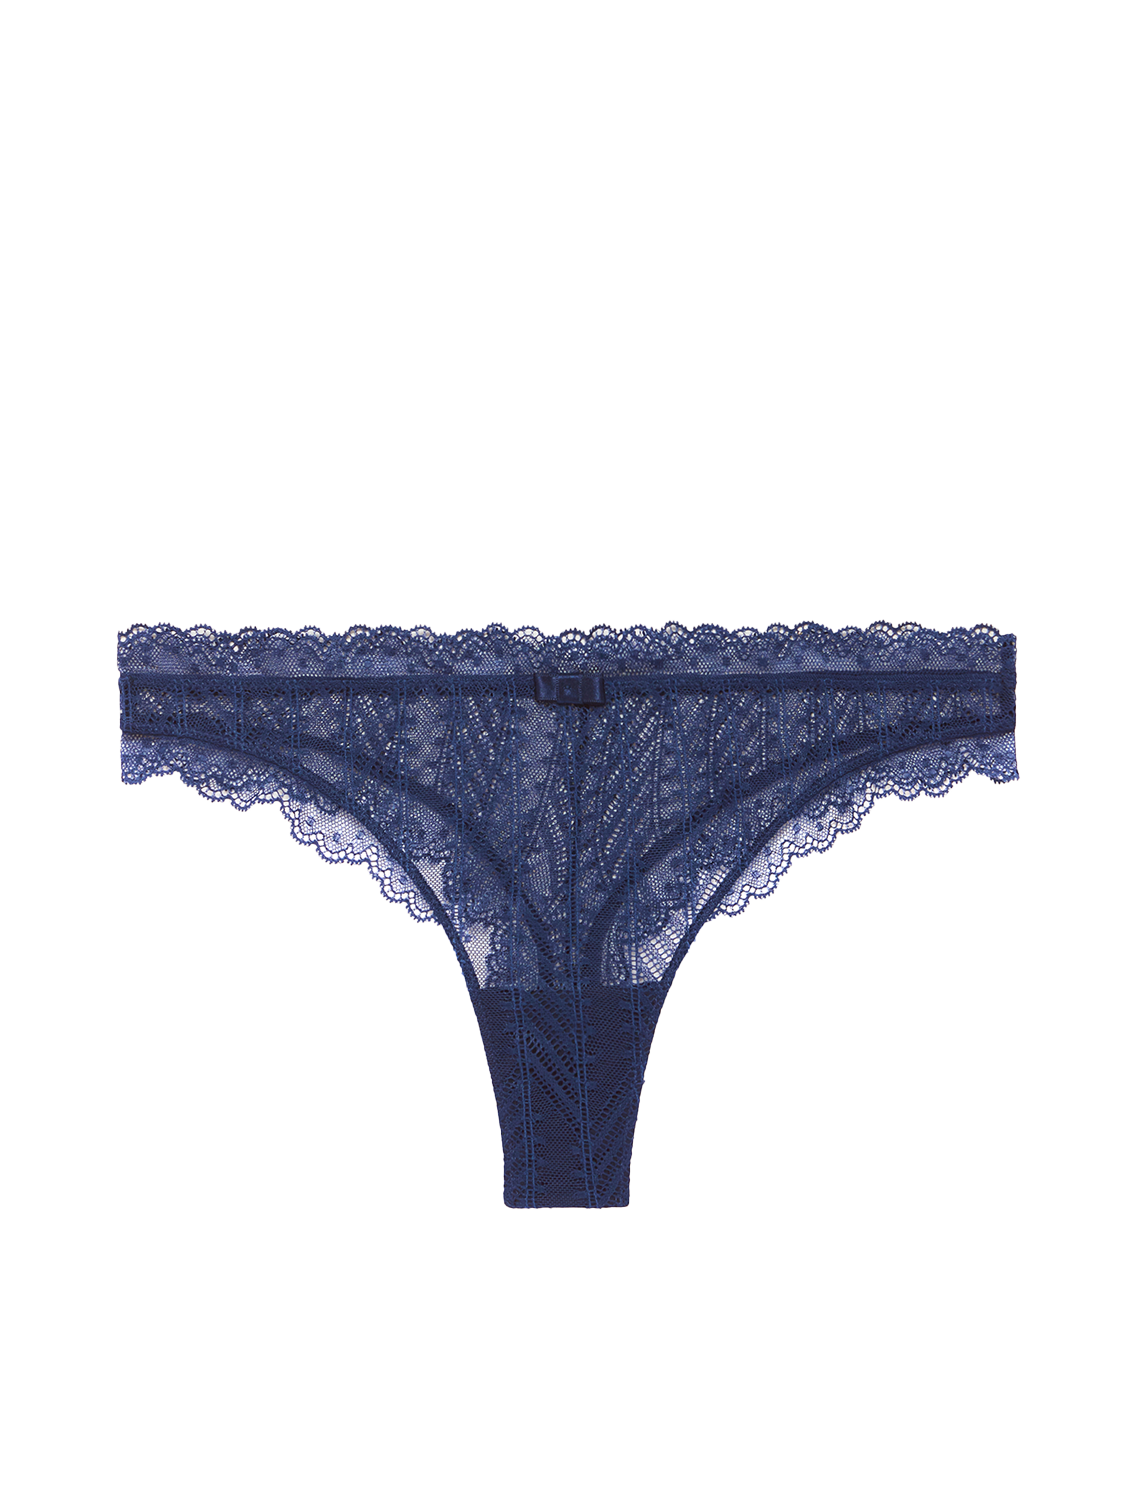 LACE THONG  Chrome Hearts